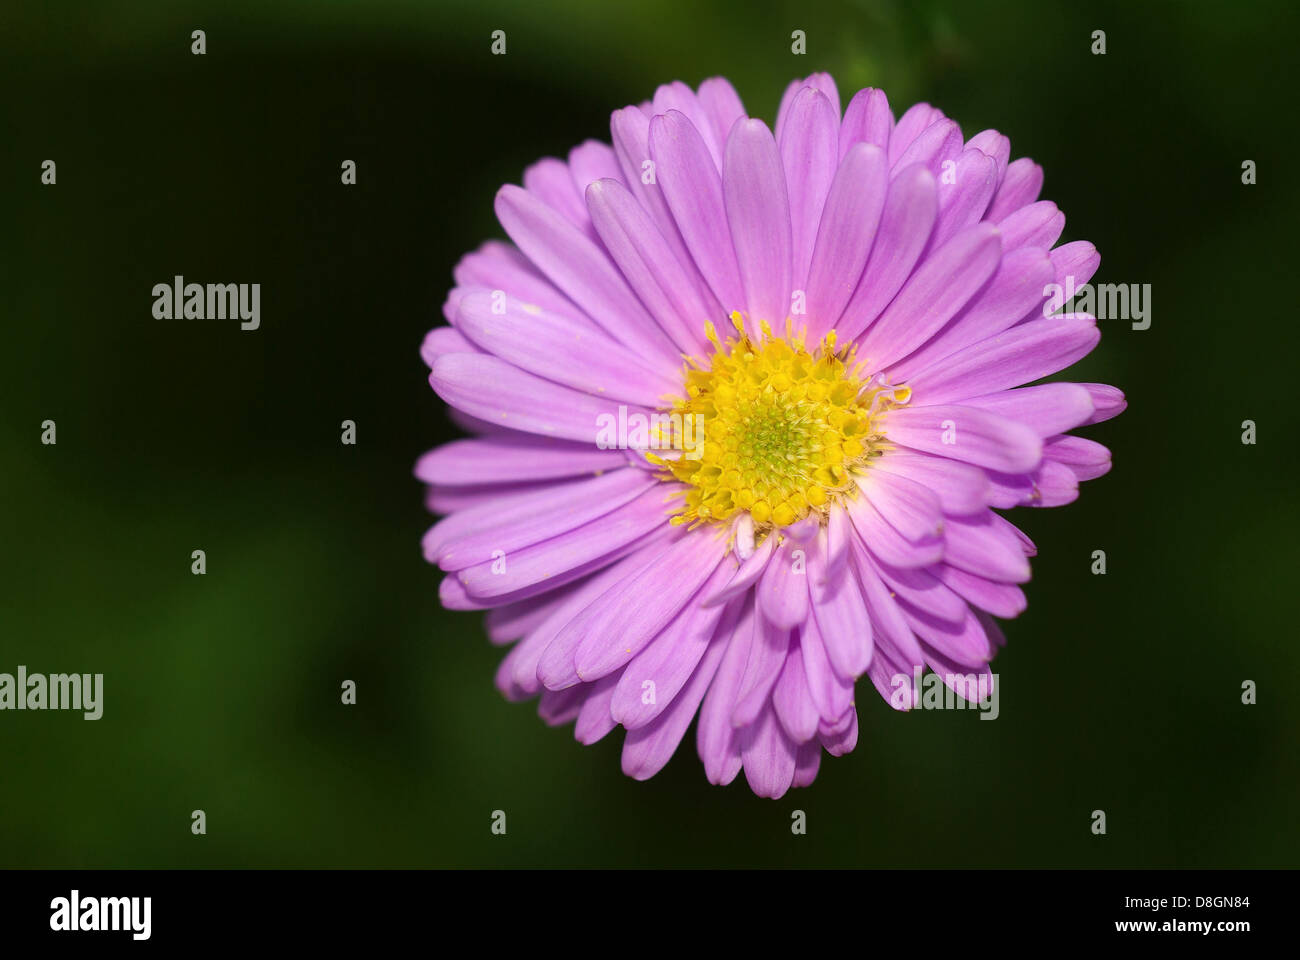 Aster Stock Photo